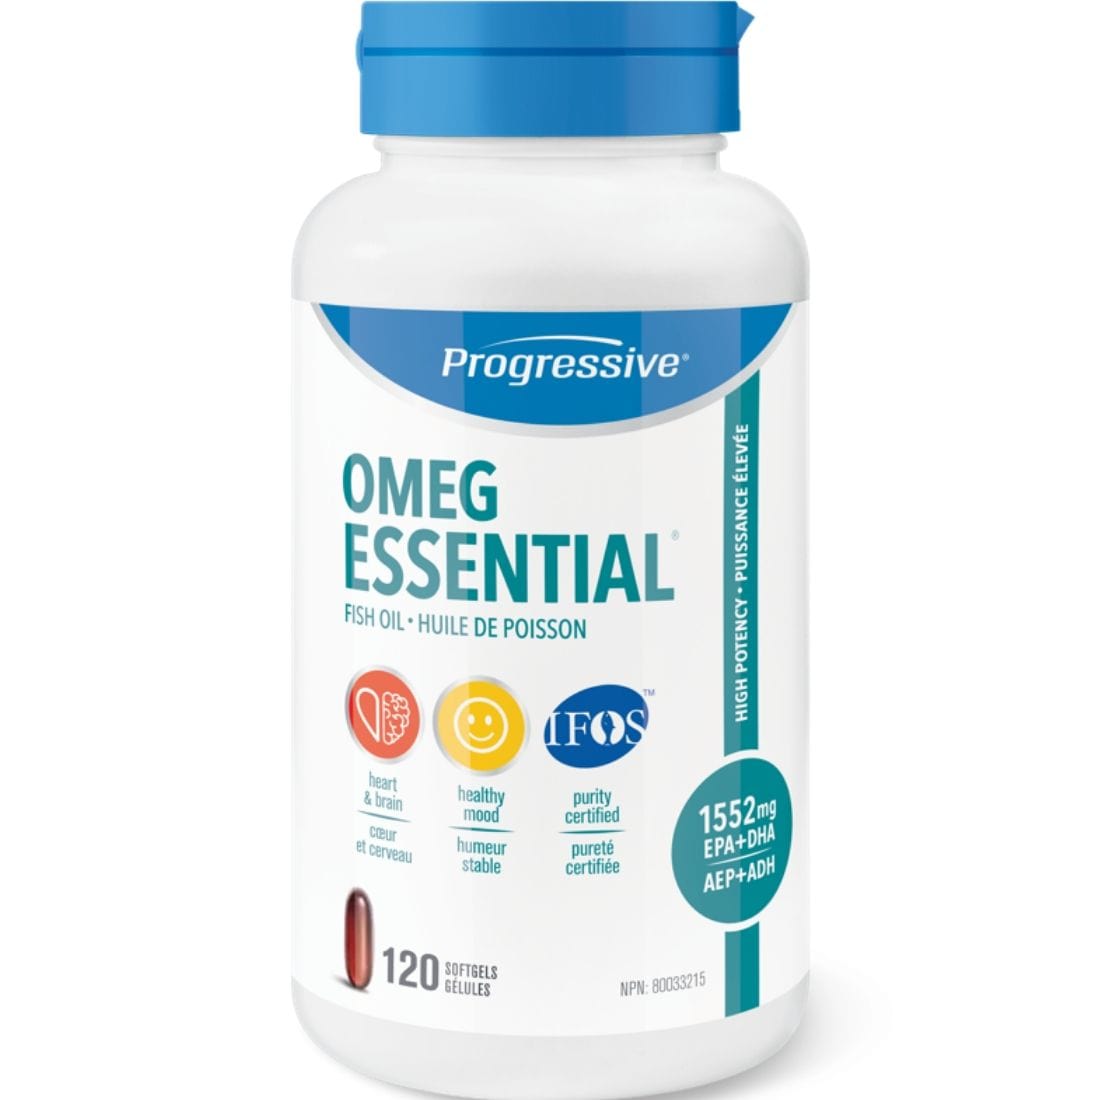 Progressive OmegEssential High Potency Fish Oil (1552mg EPA + DHA)